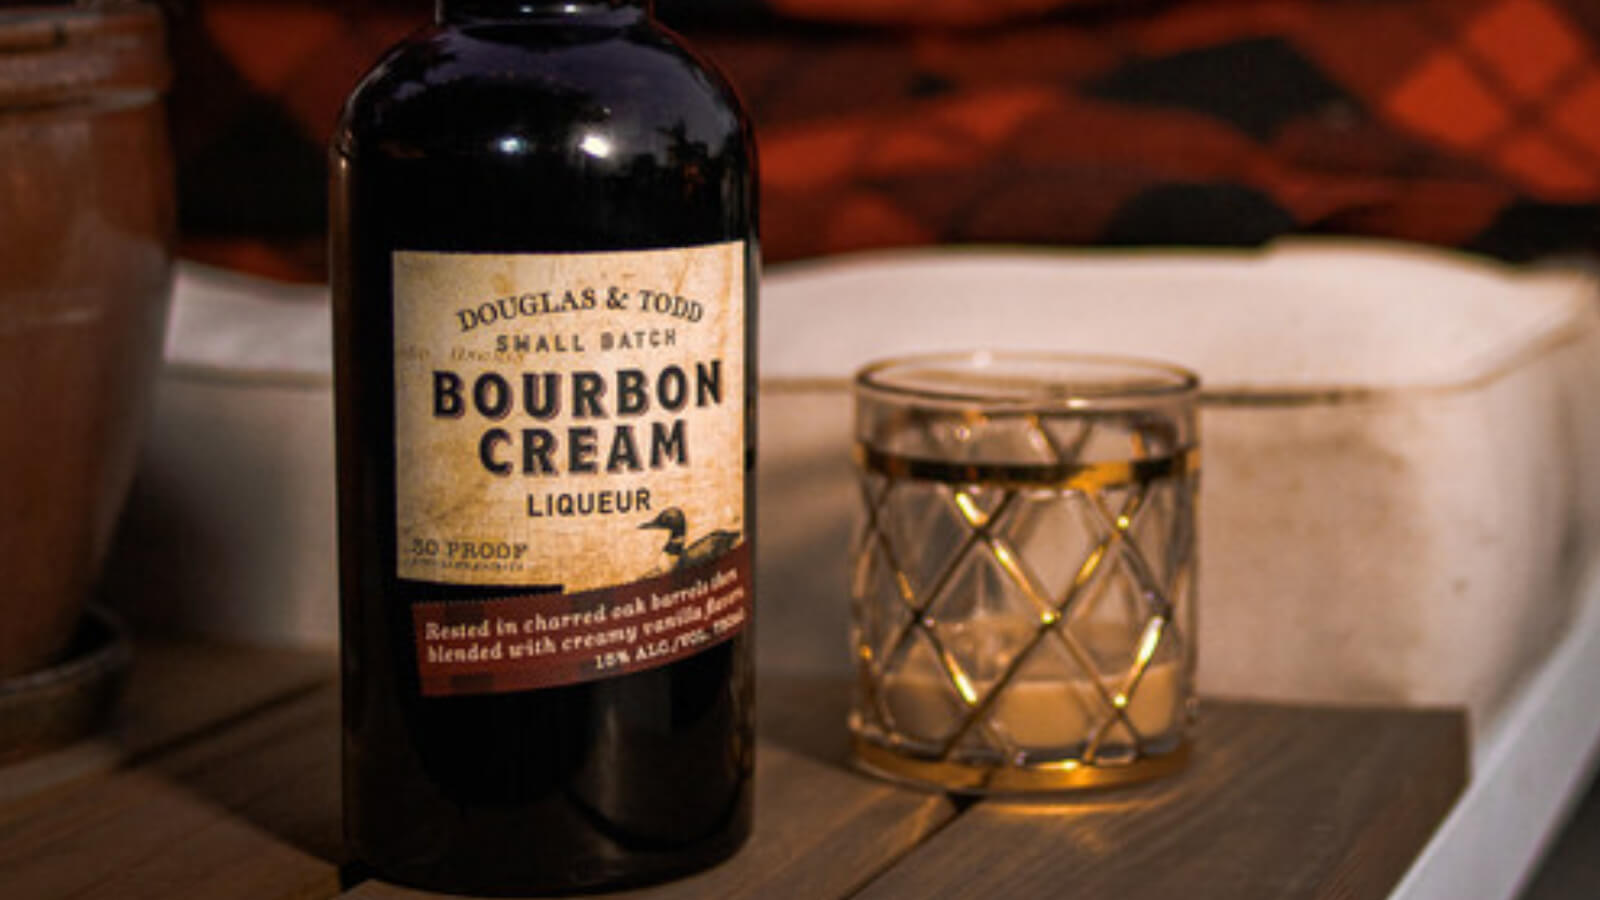 A bottle of Douglas & Todd bourbon cream with a glass